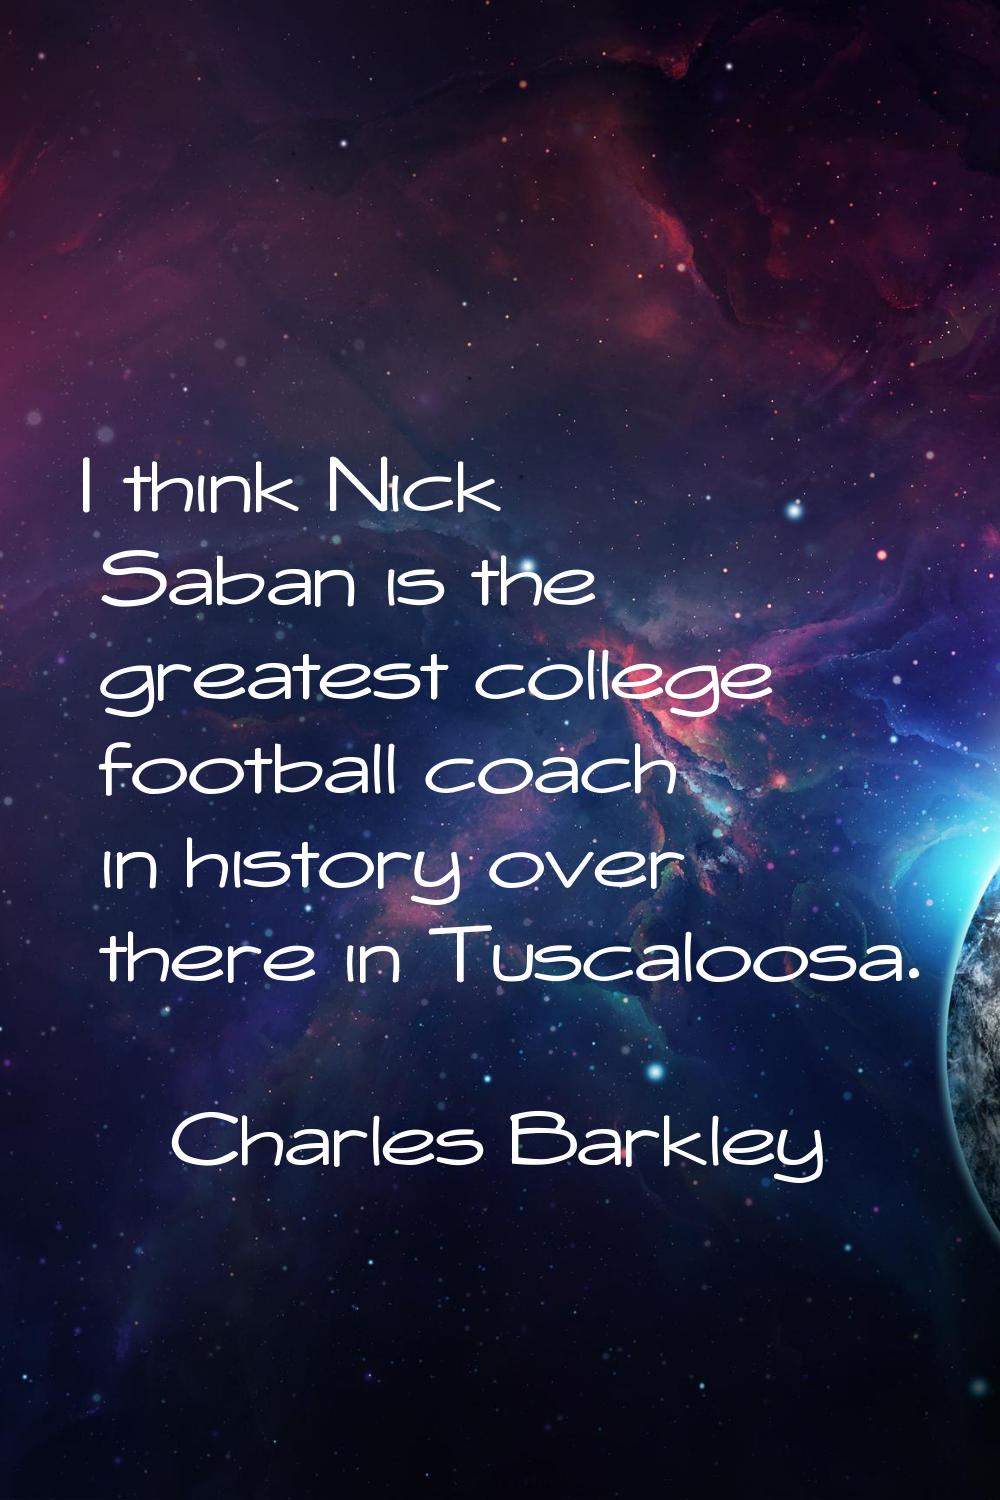 I think Nick Saban is the greatest college football coach in history over there in Tuscaloosa.